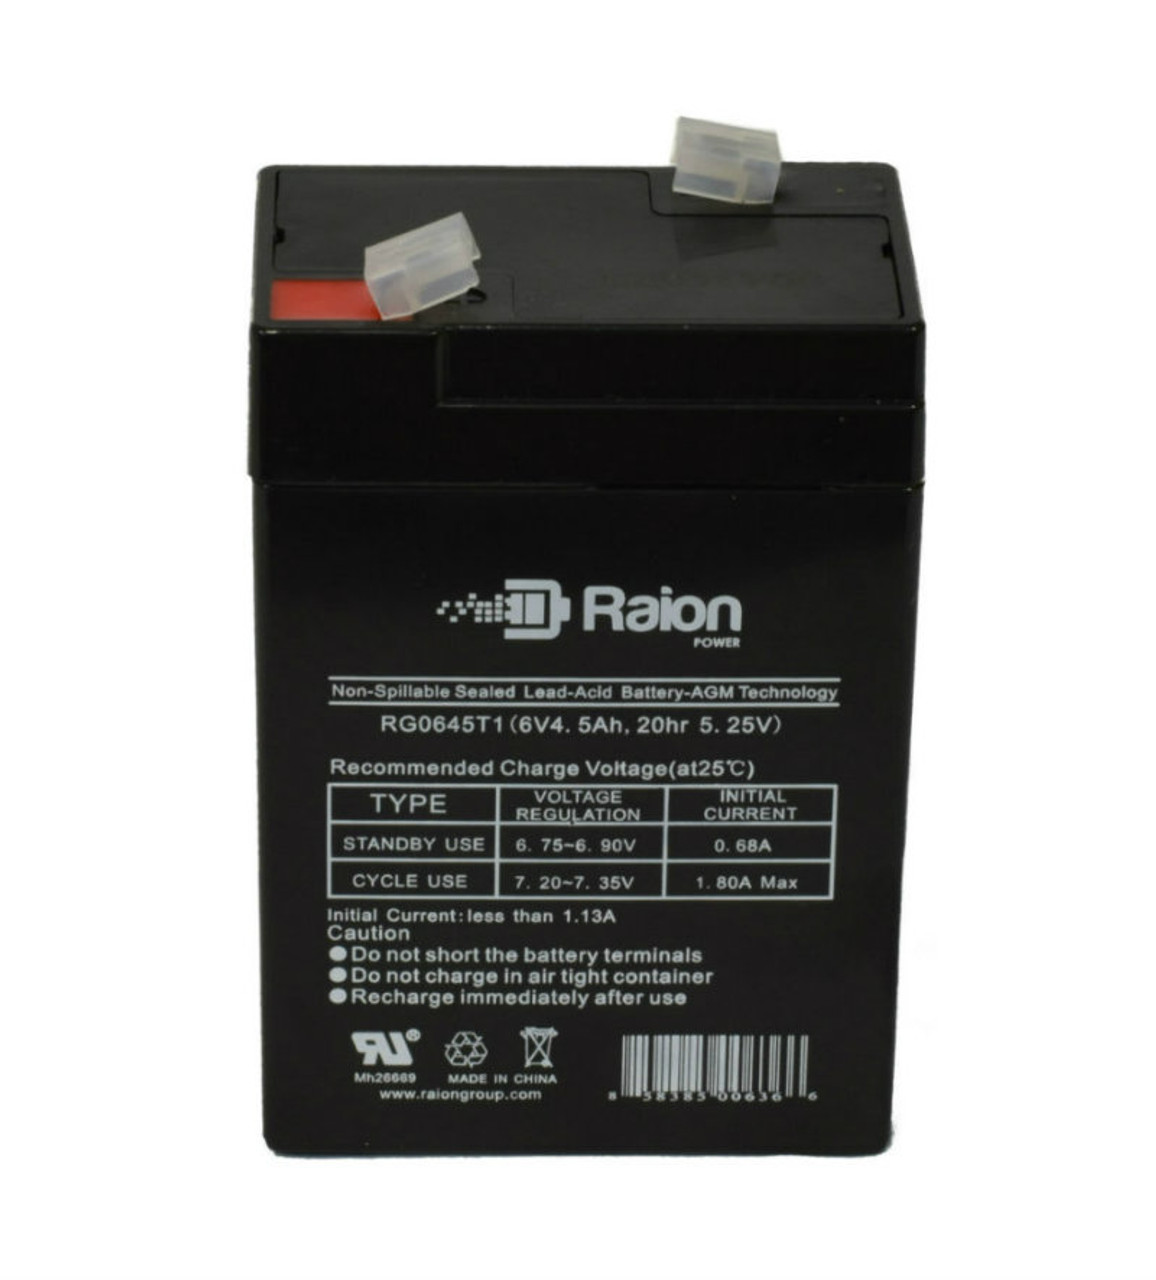 Raion Power RG0645T1 Replacement Battery Cartridge for Flying Power NS6-4